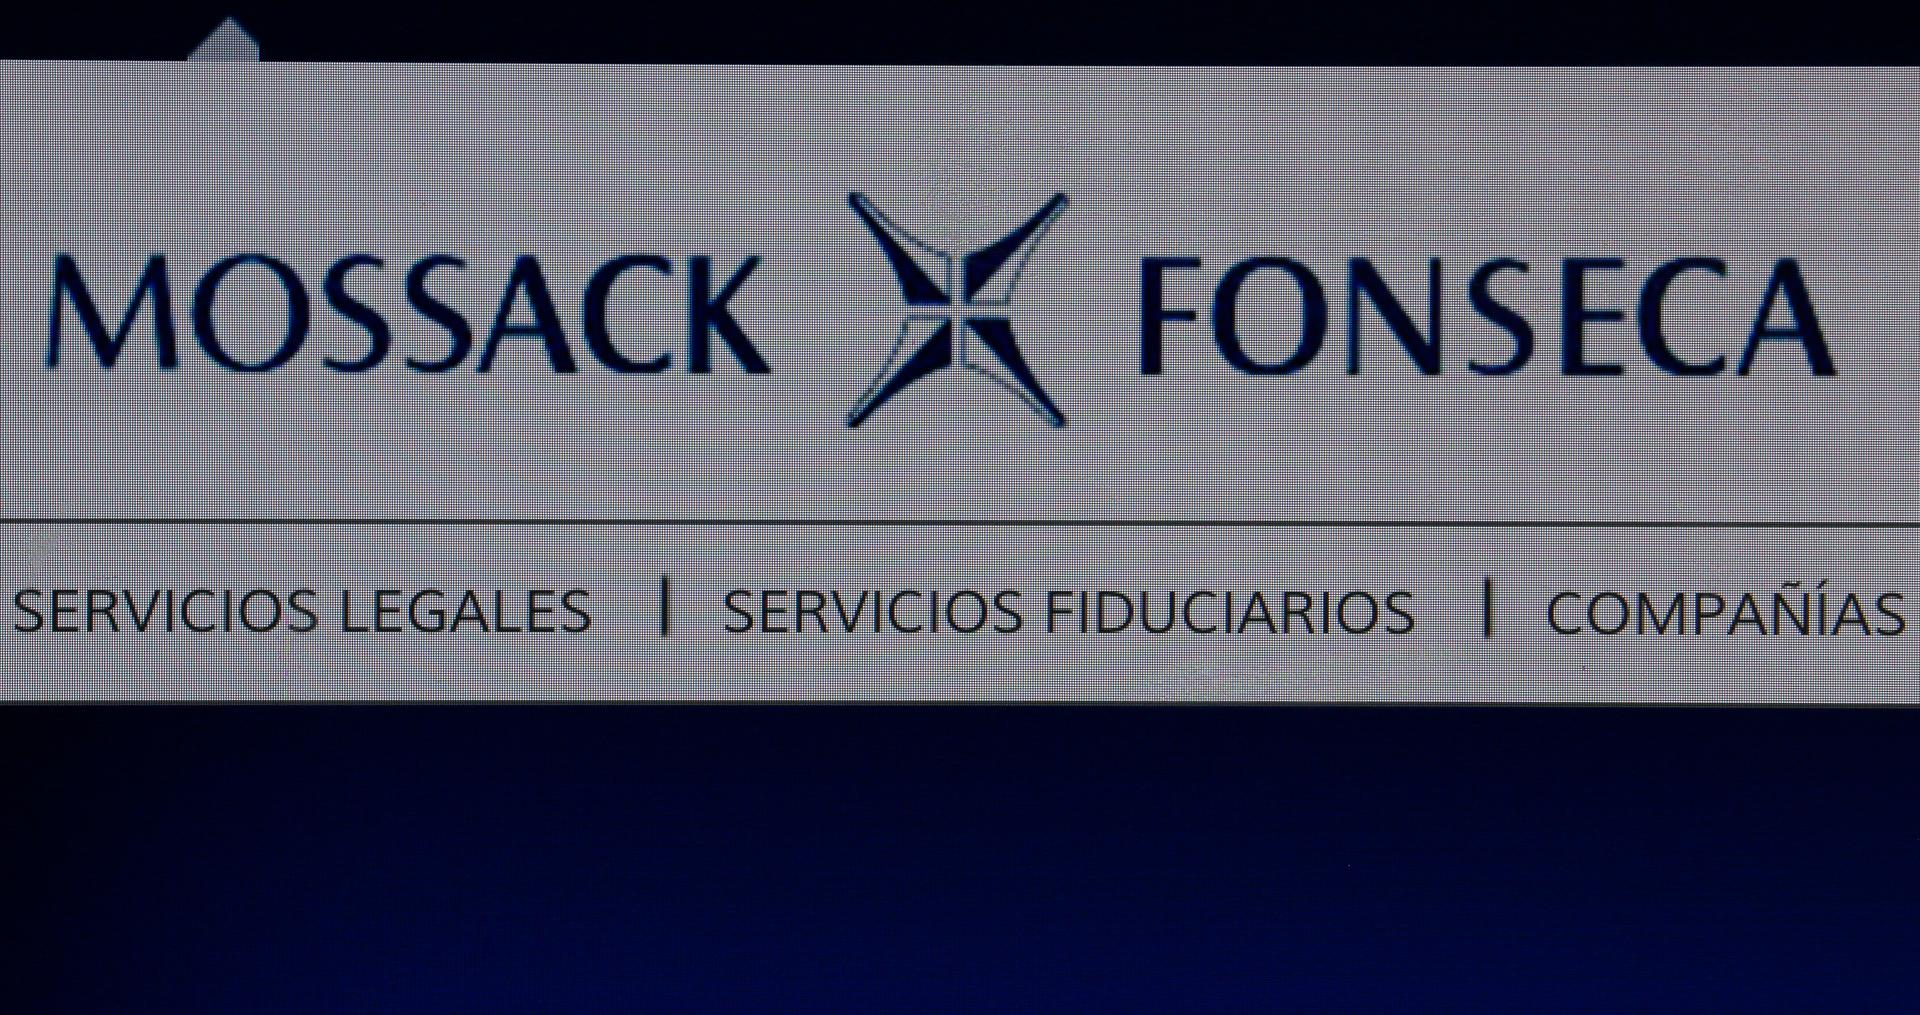 The Spanish language website of the Mossack Fonseca law firm is pictured in this illustration taken April 4, 2016. 